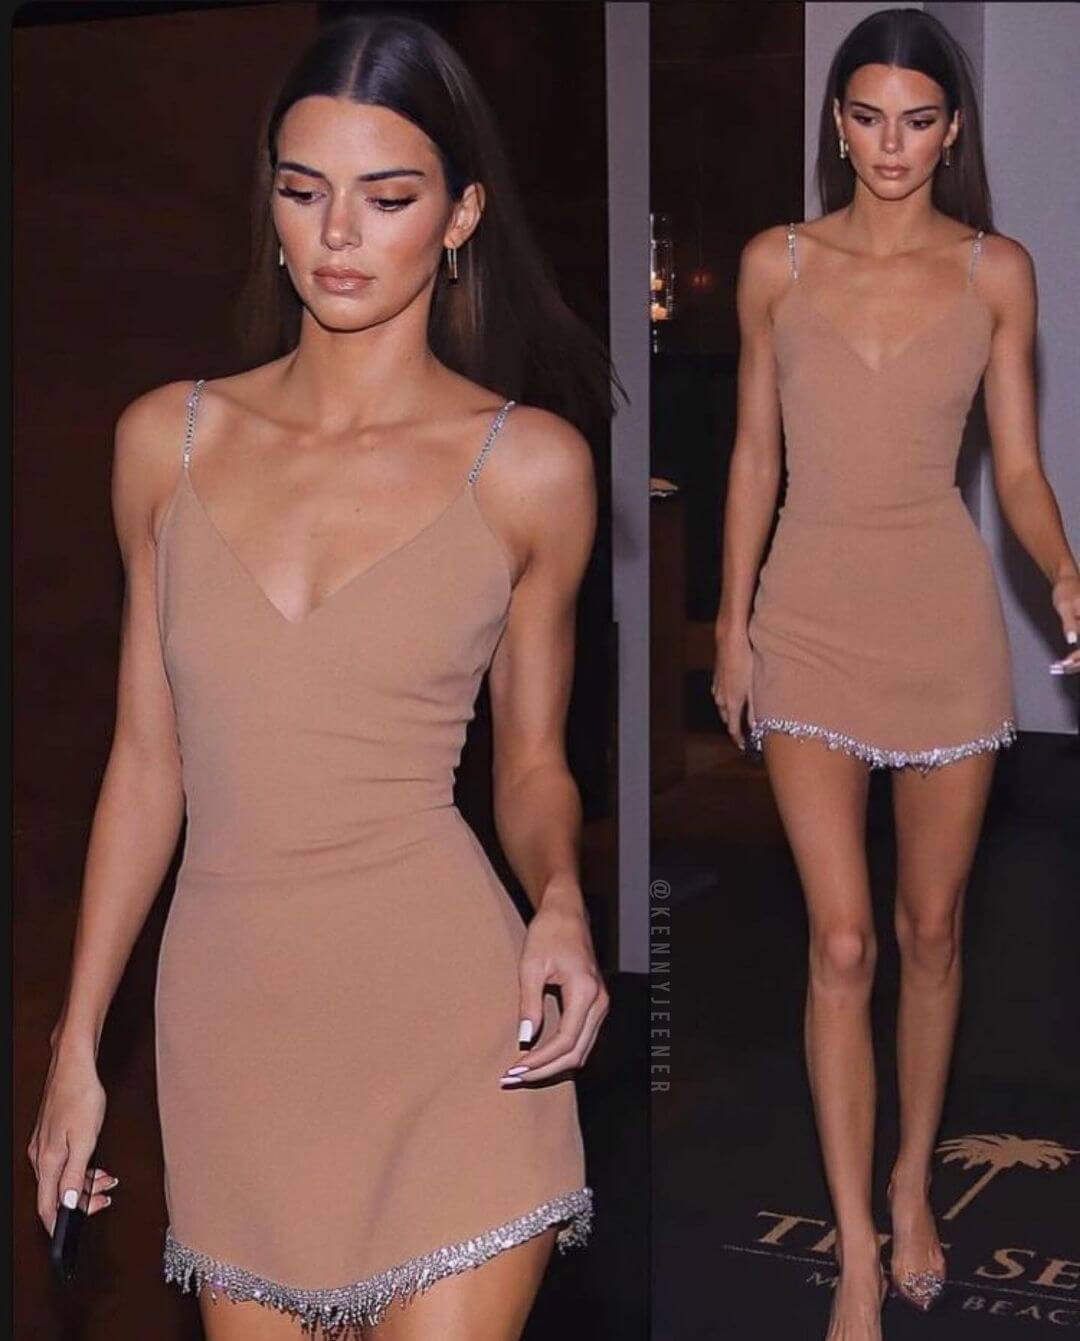 Clothes And Accessories You Need To Dress Like Kendall Jenner Mini Dresses Like Kendall's Are To Die For